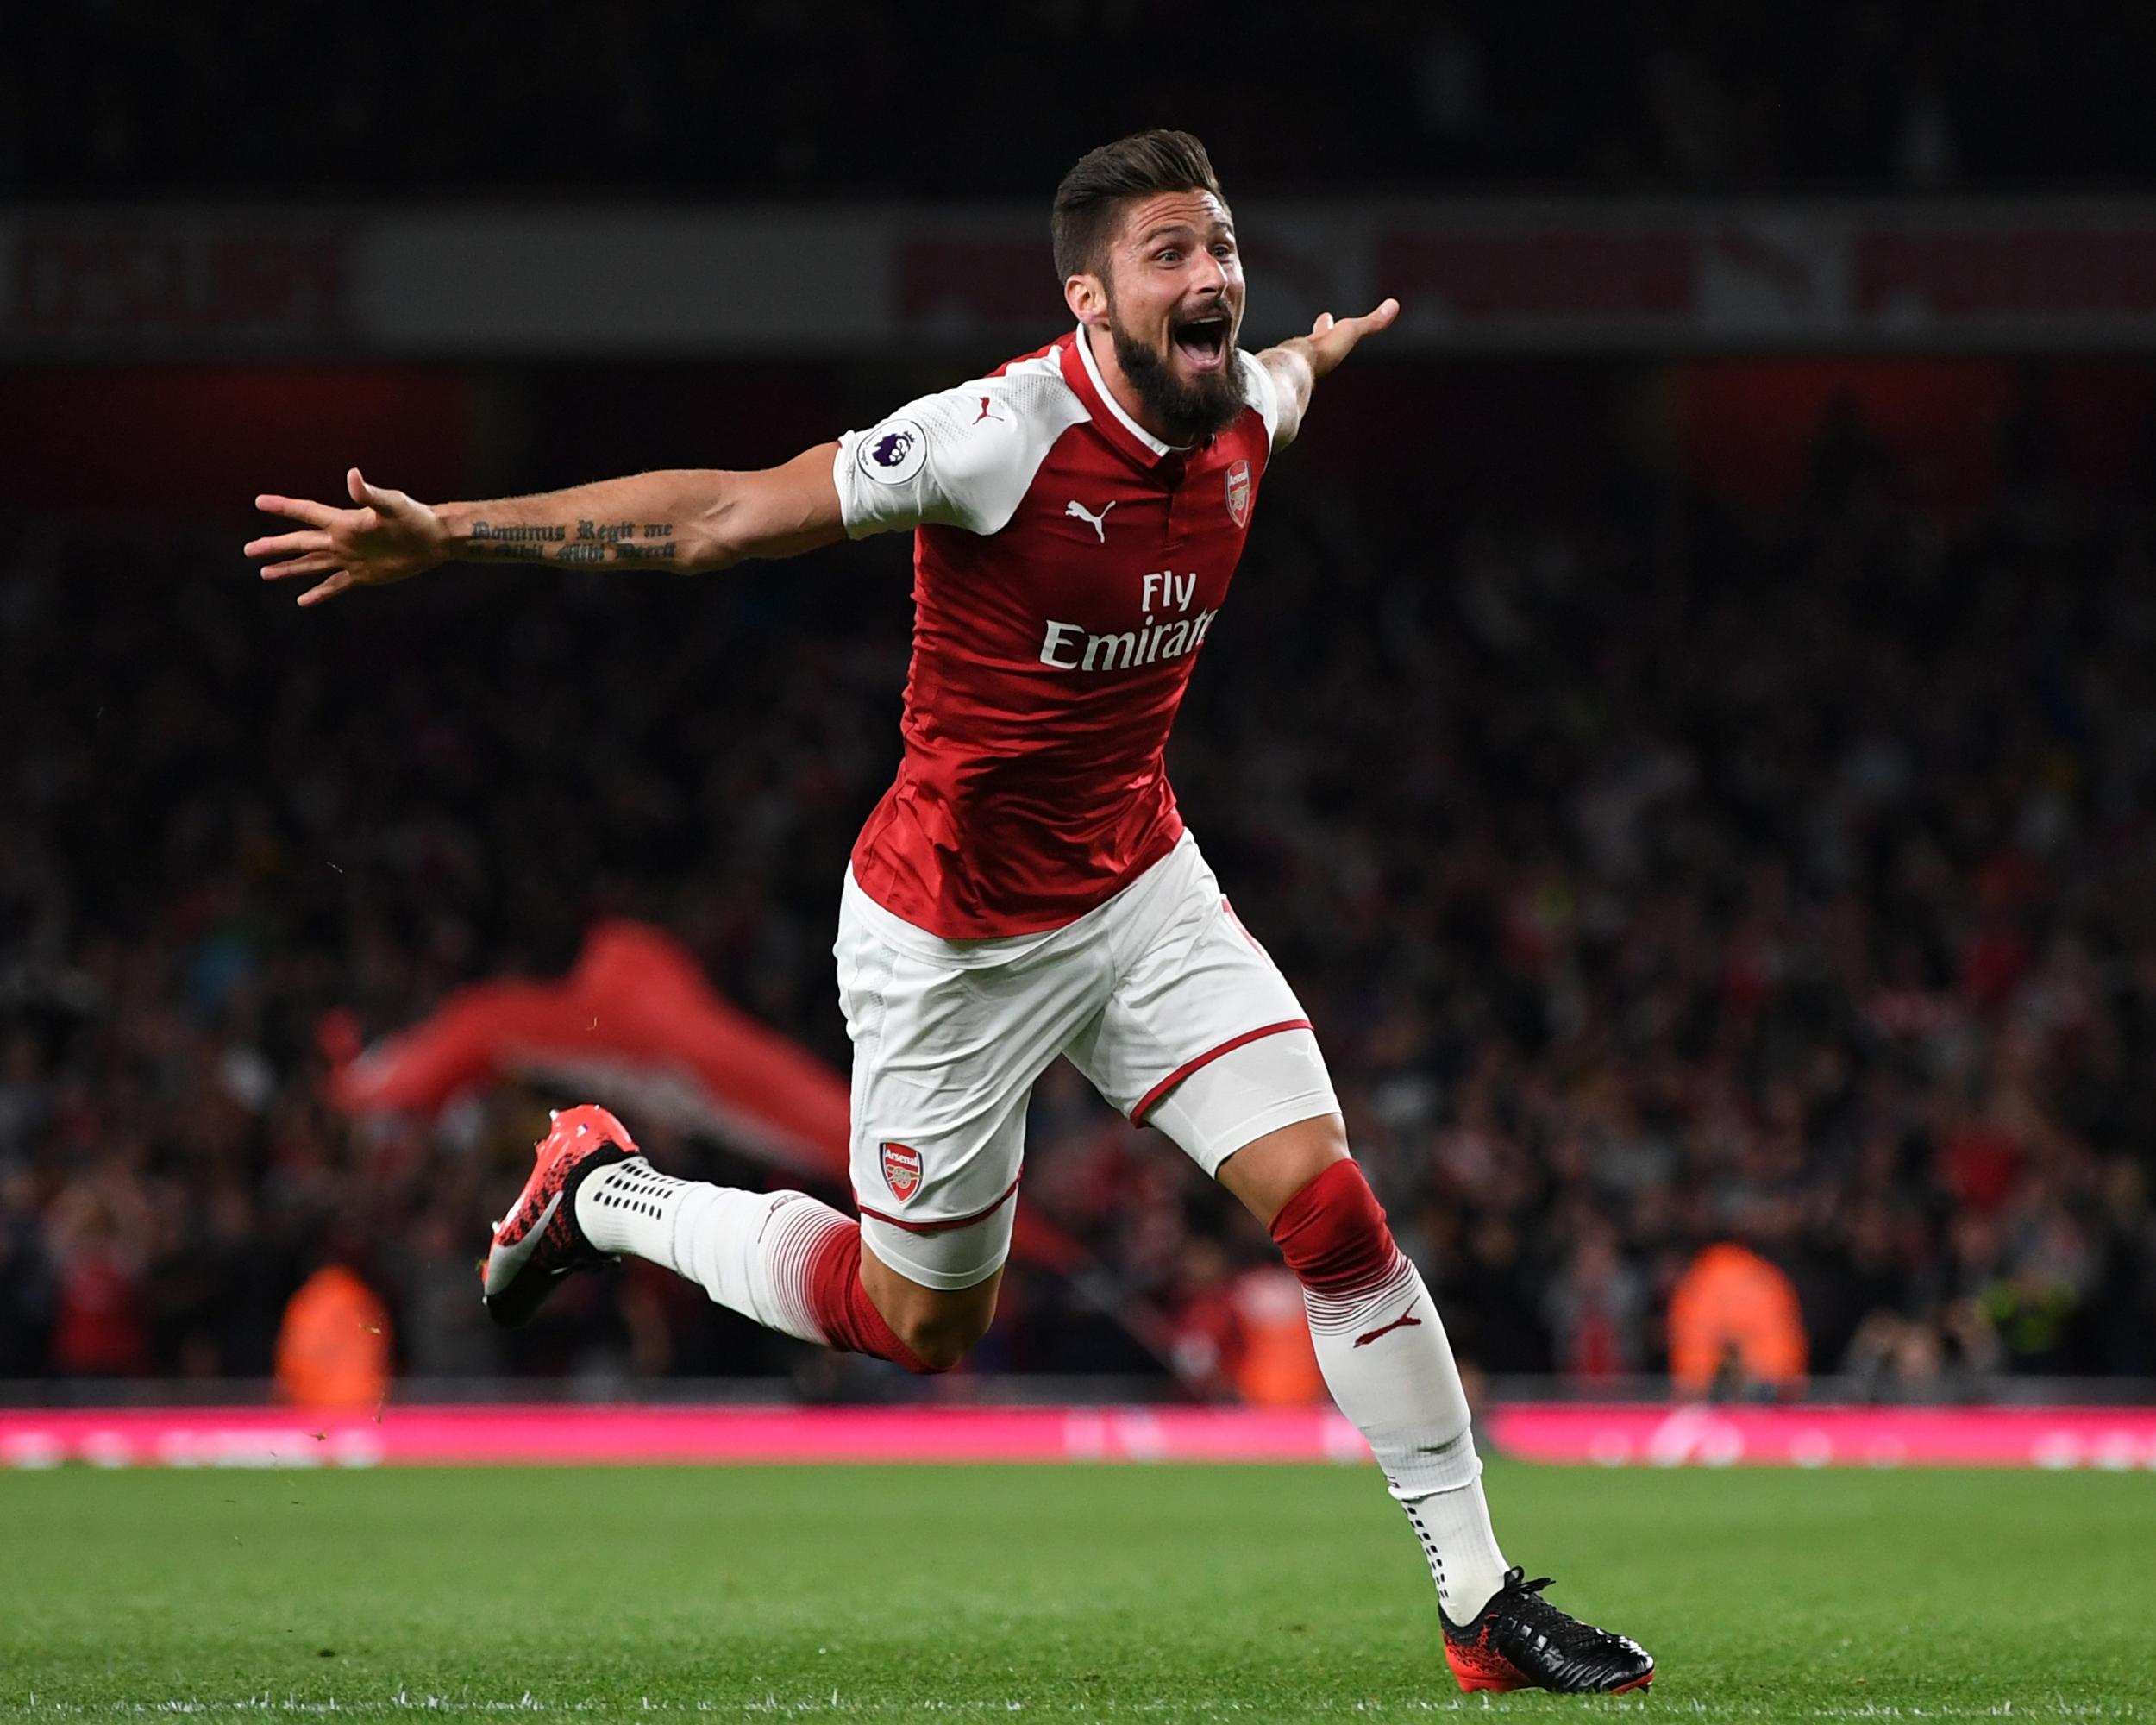 Olivier Giroud came on and scored a late winner for Arsenal